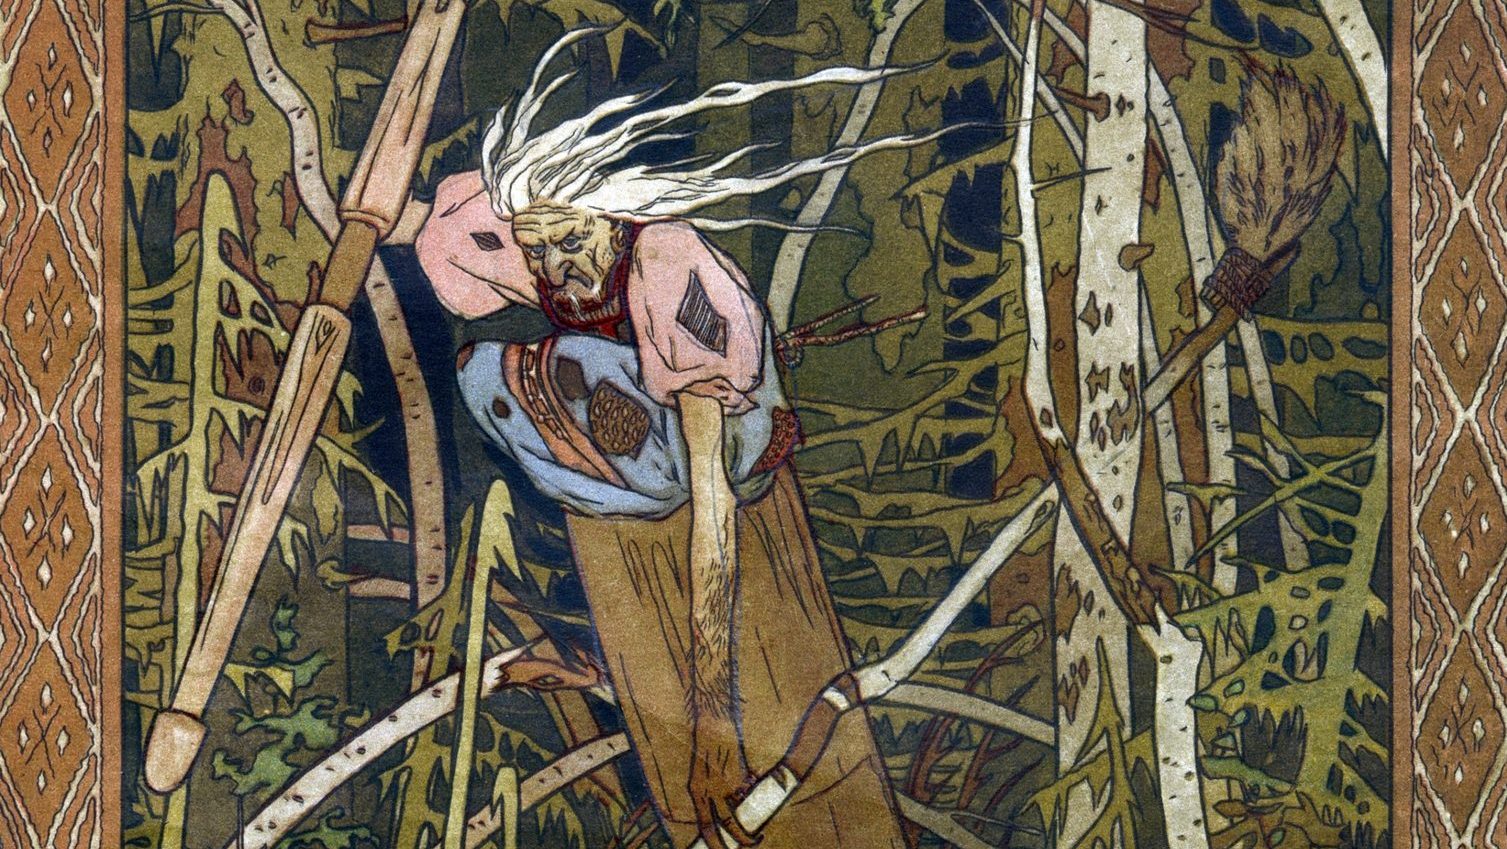 Baba Yaga, the fairy tale scourge from Slavic folklore, depicted in an illustration from the book Vasilisa the Beautiful, 1900. Photo: Fine Art Images/Heritage Images/Getty